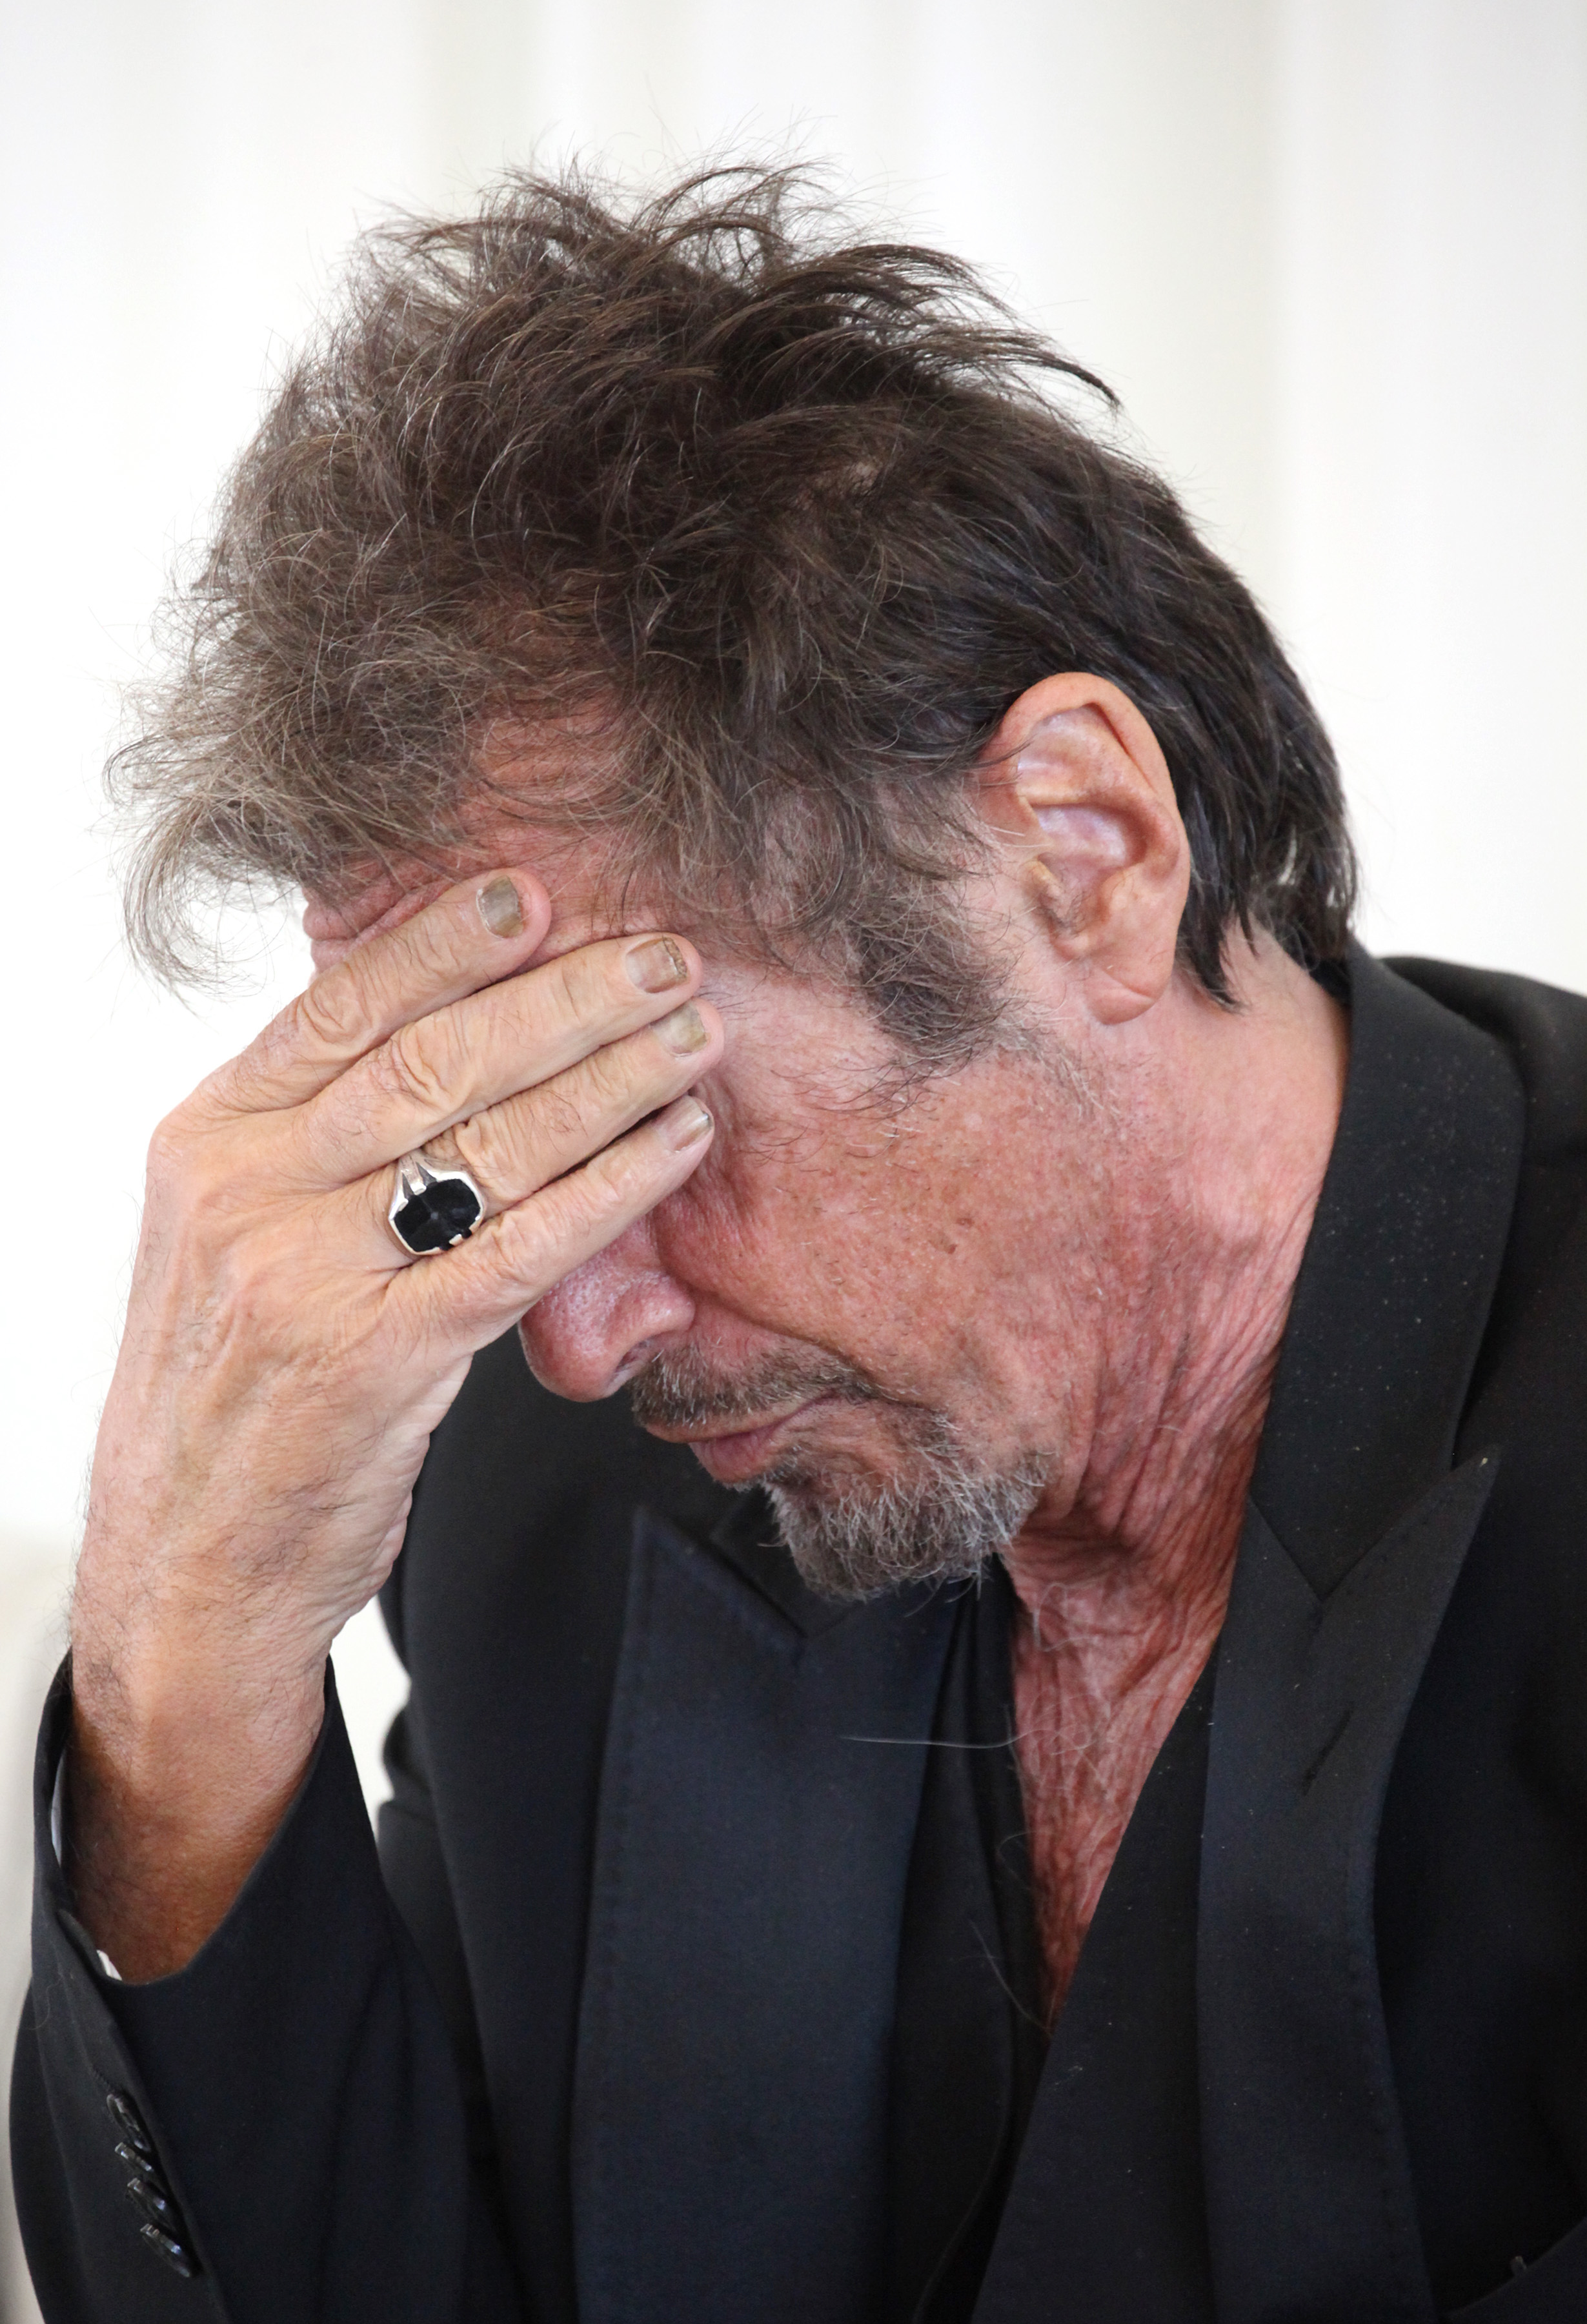 Al Pacino in New York City on September 19, 2012. | Source: Getty Images